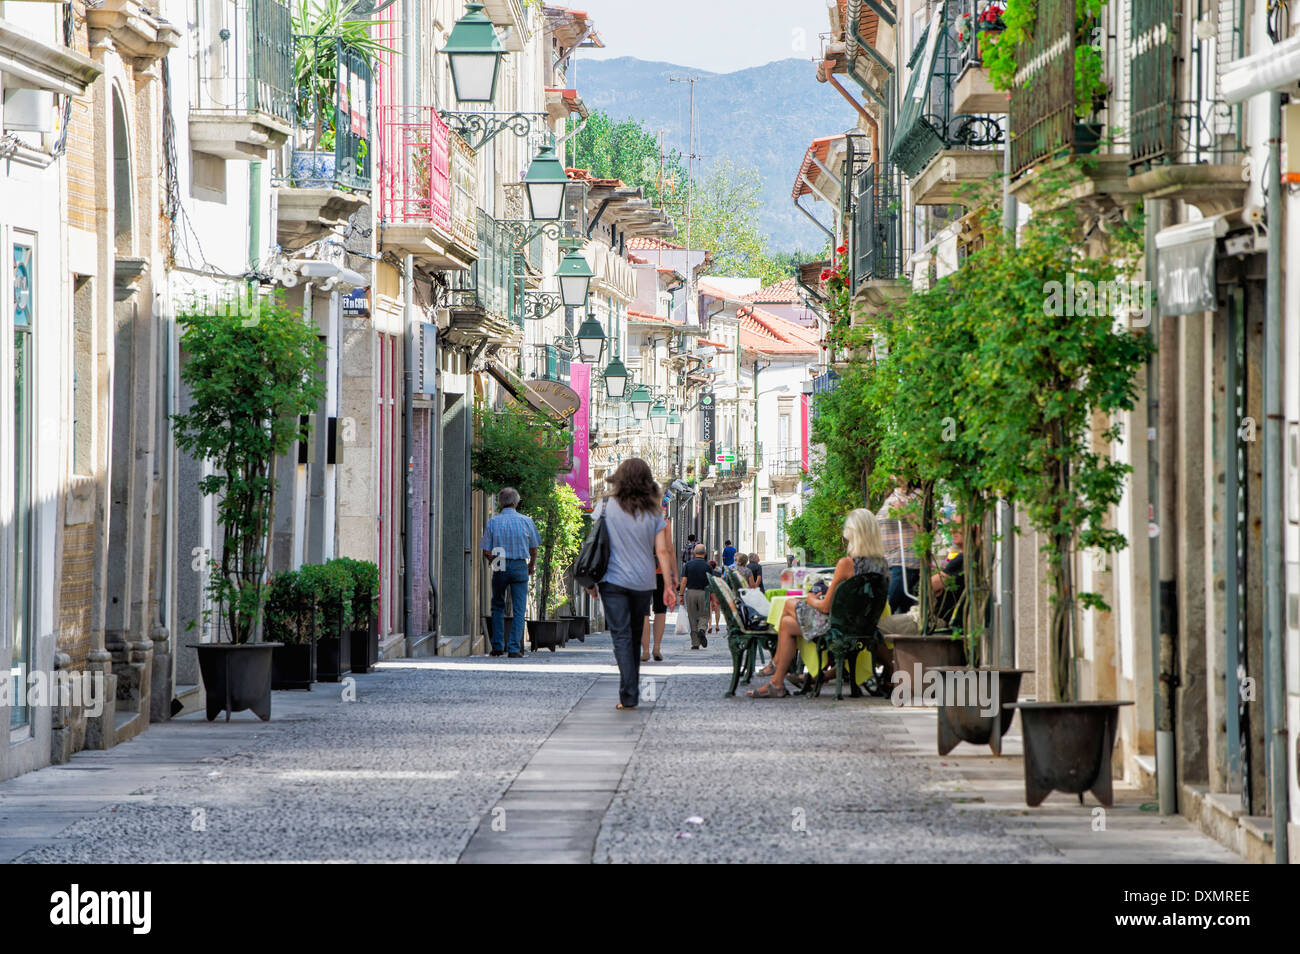 Viana High Resolution Stock Photography and Images - Alamy